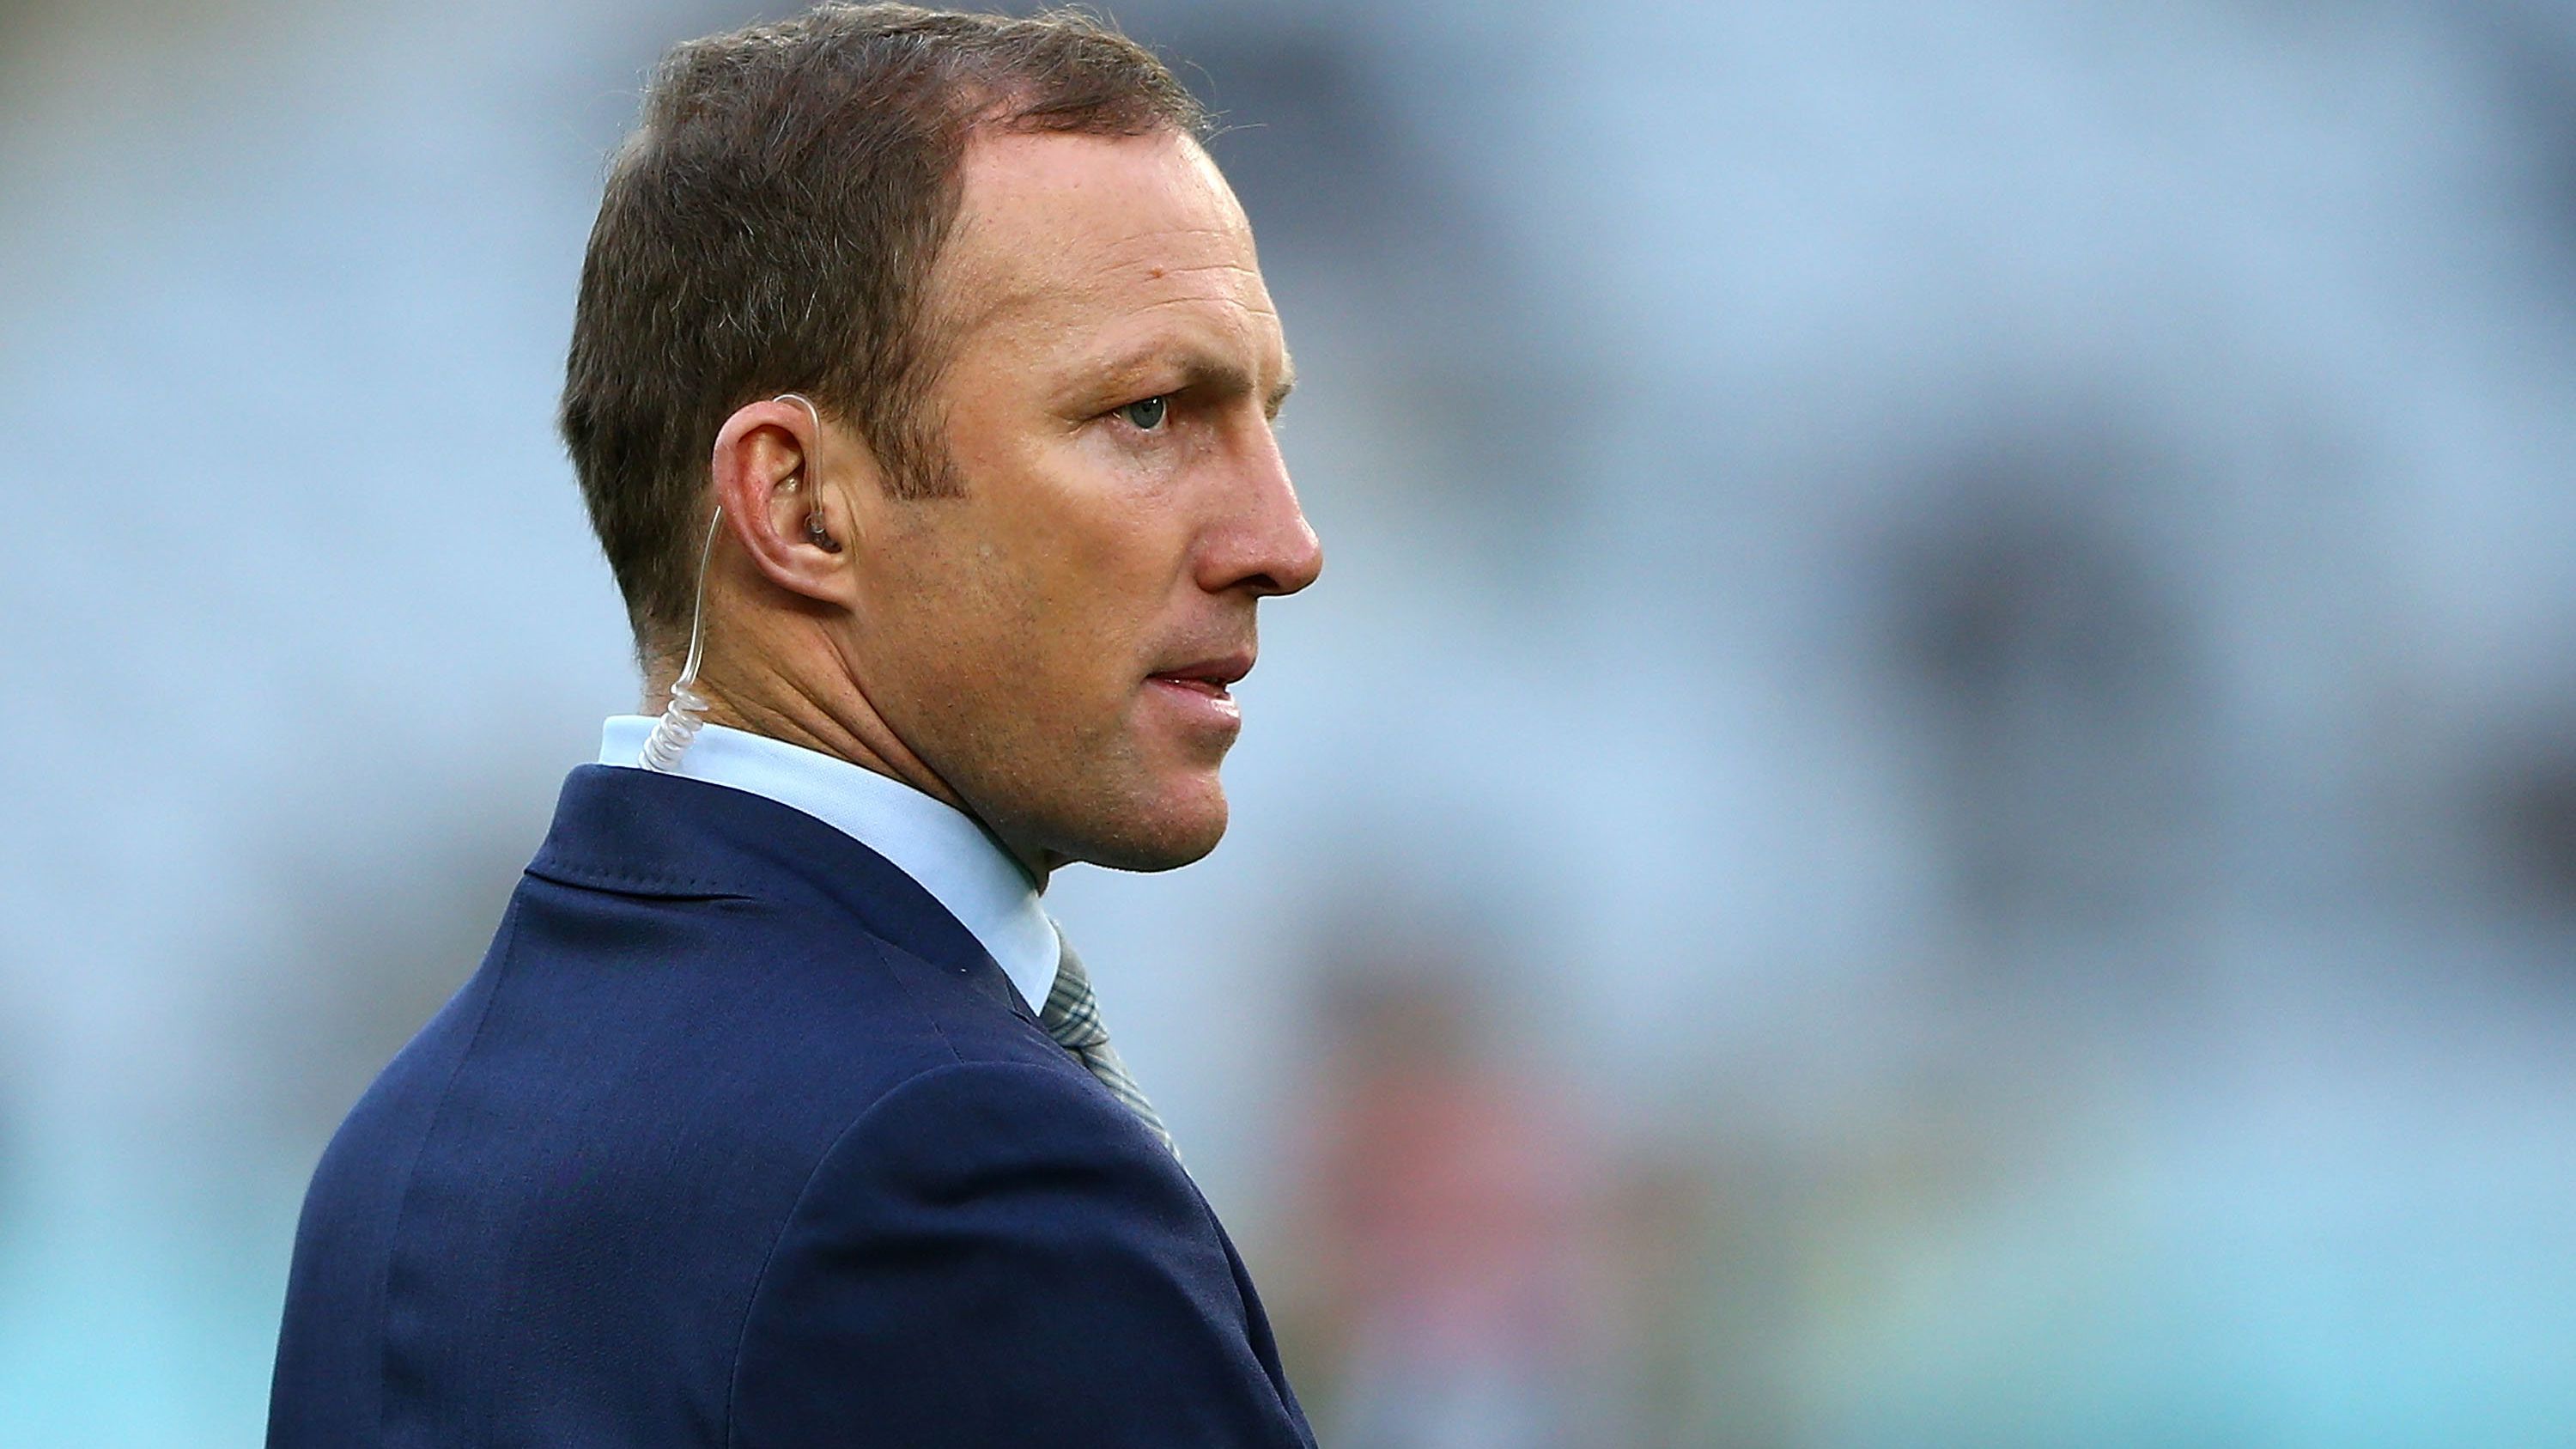 Darren Lockyer during the NRL Elimination Final match between the Panthers Panthers and the New Zealand Warriors at ANZ Stadium on September 8, 2018 in Sydney, Australia.